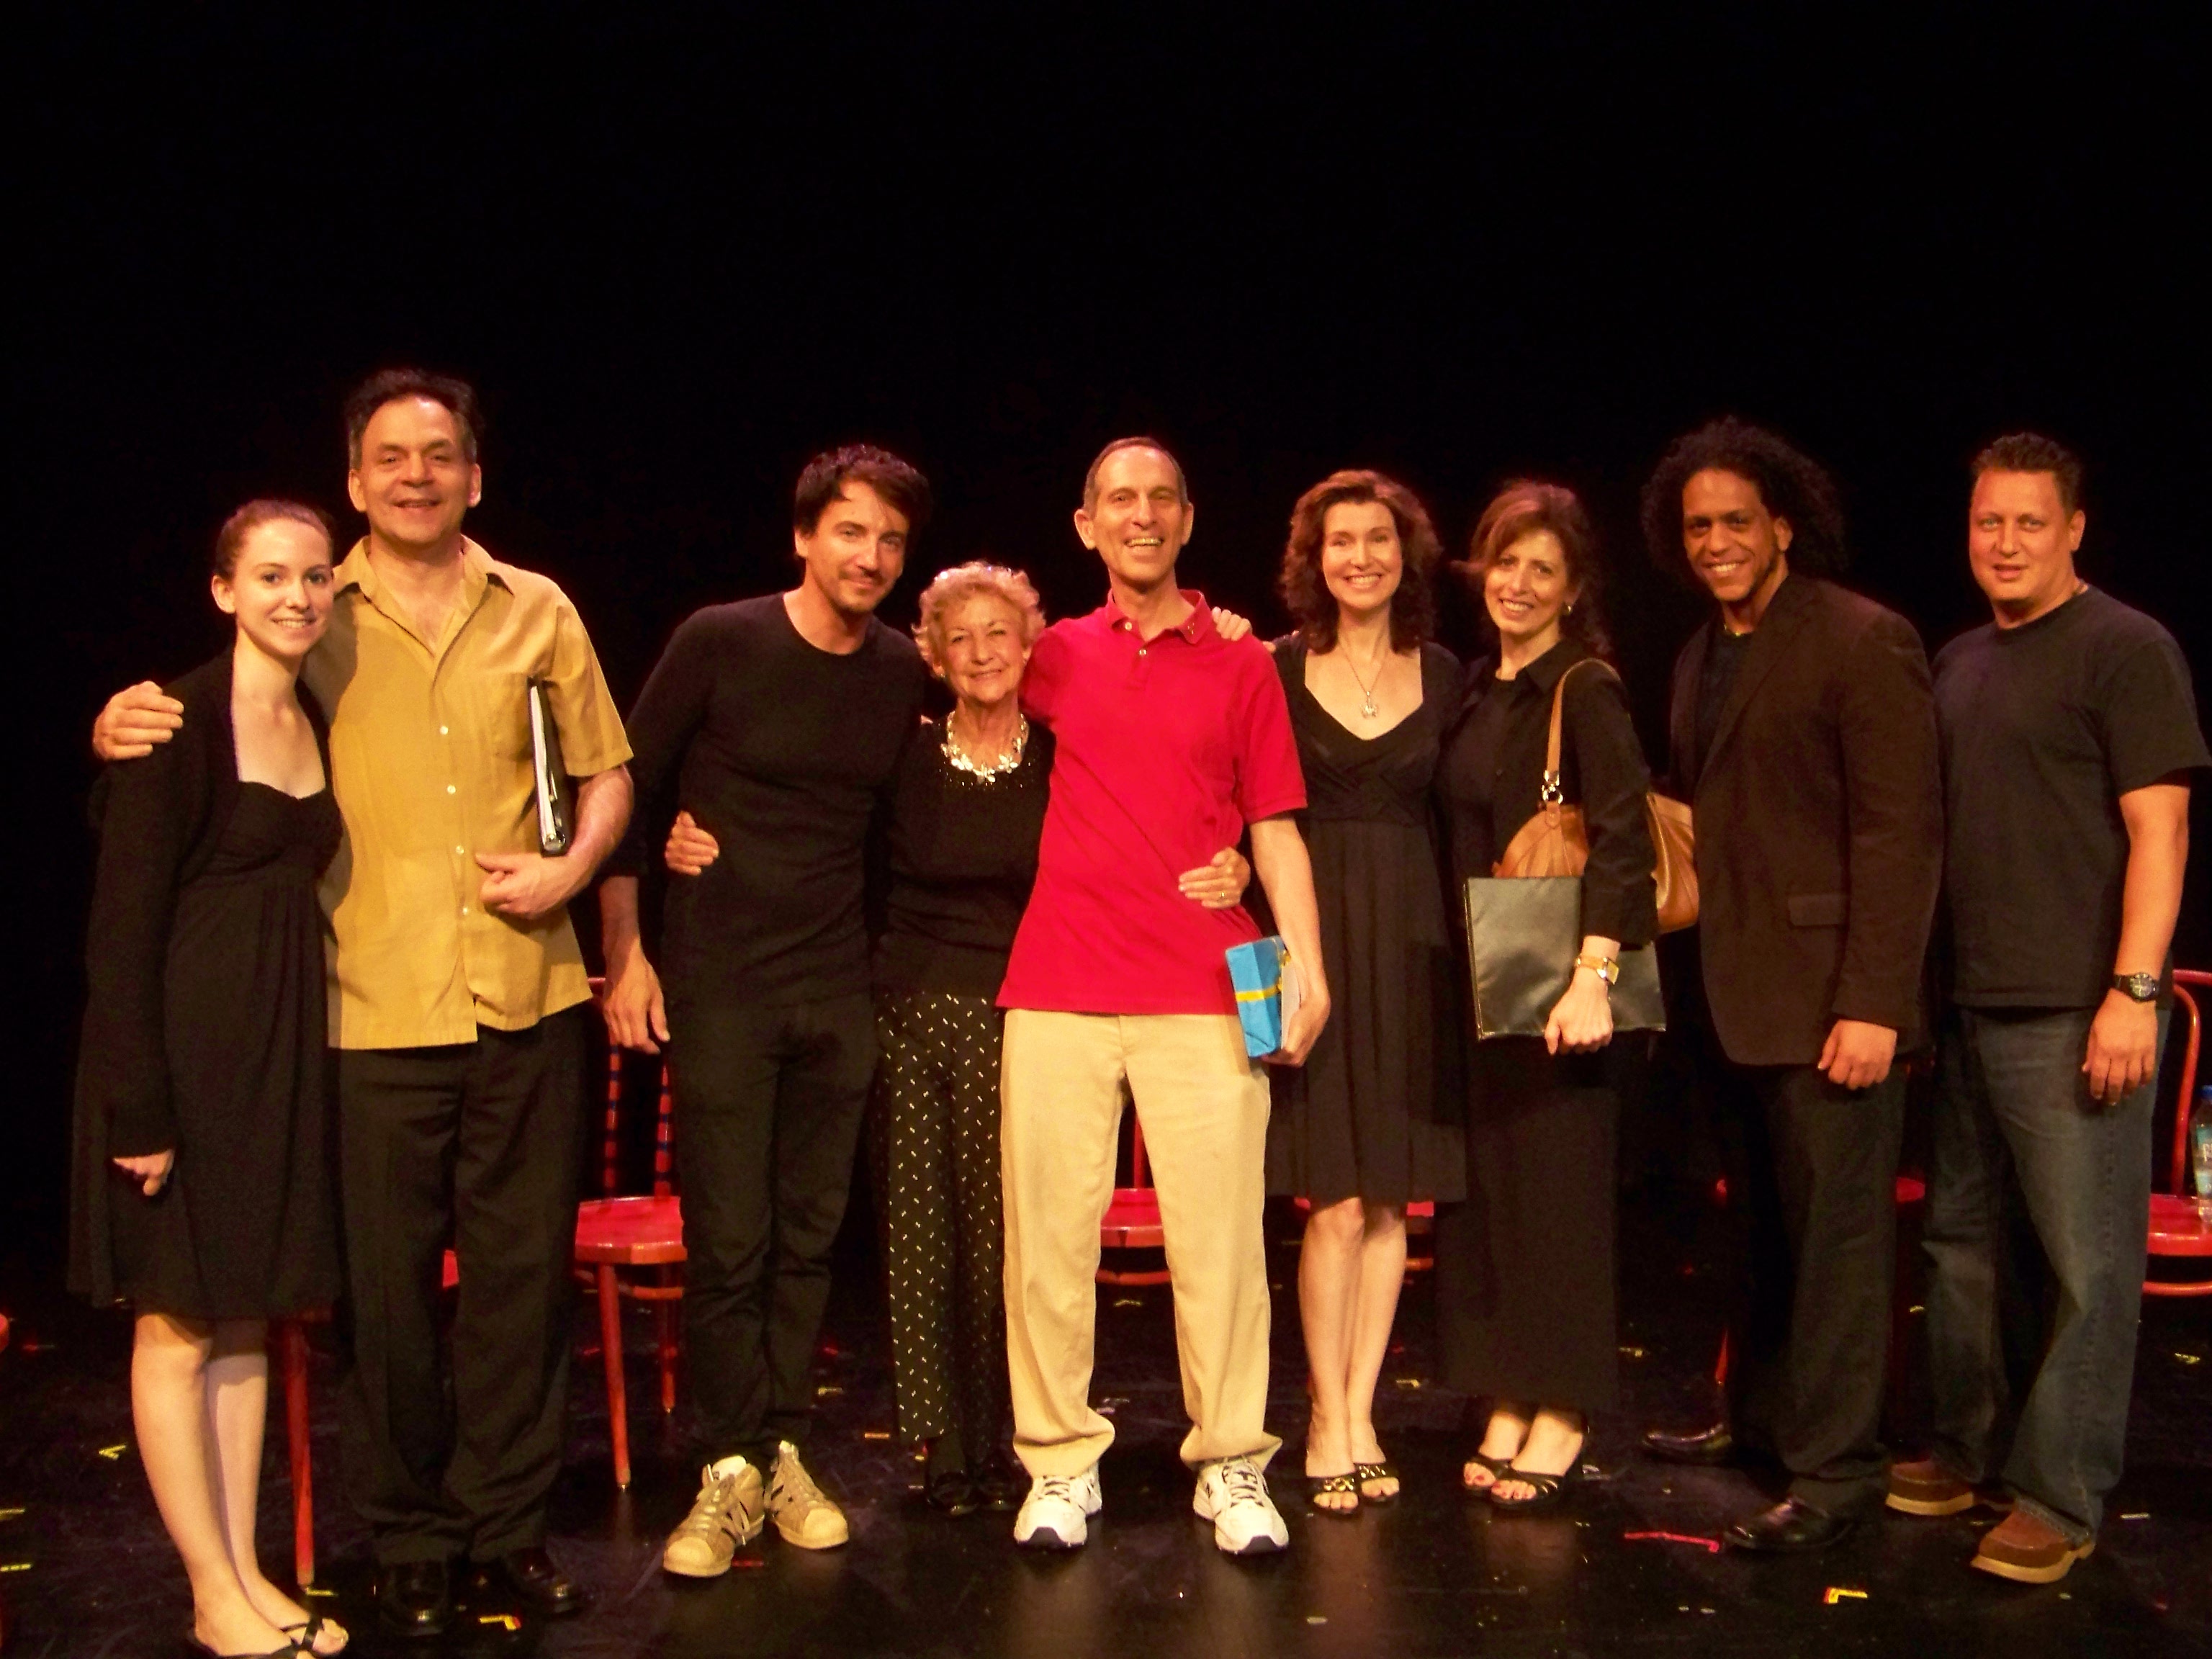 (date posted). Phillip W. Weiss (center) with the cast of Lesson for Life (from L to R, Michelle Halterman, Peter Carlaftes, Steven Carrieri, Langley Deaver, Phil, Olga Baldos, Chaka DeSilva, Salvatore Lombardo), June Havoc Theater, New York City, 7/21/0